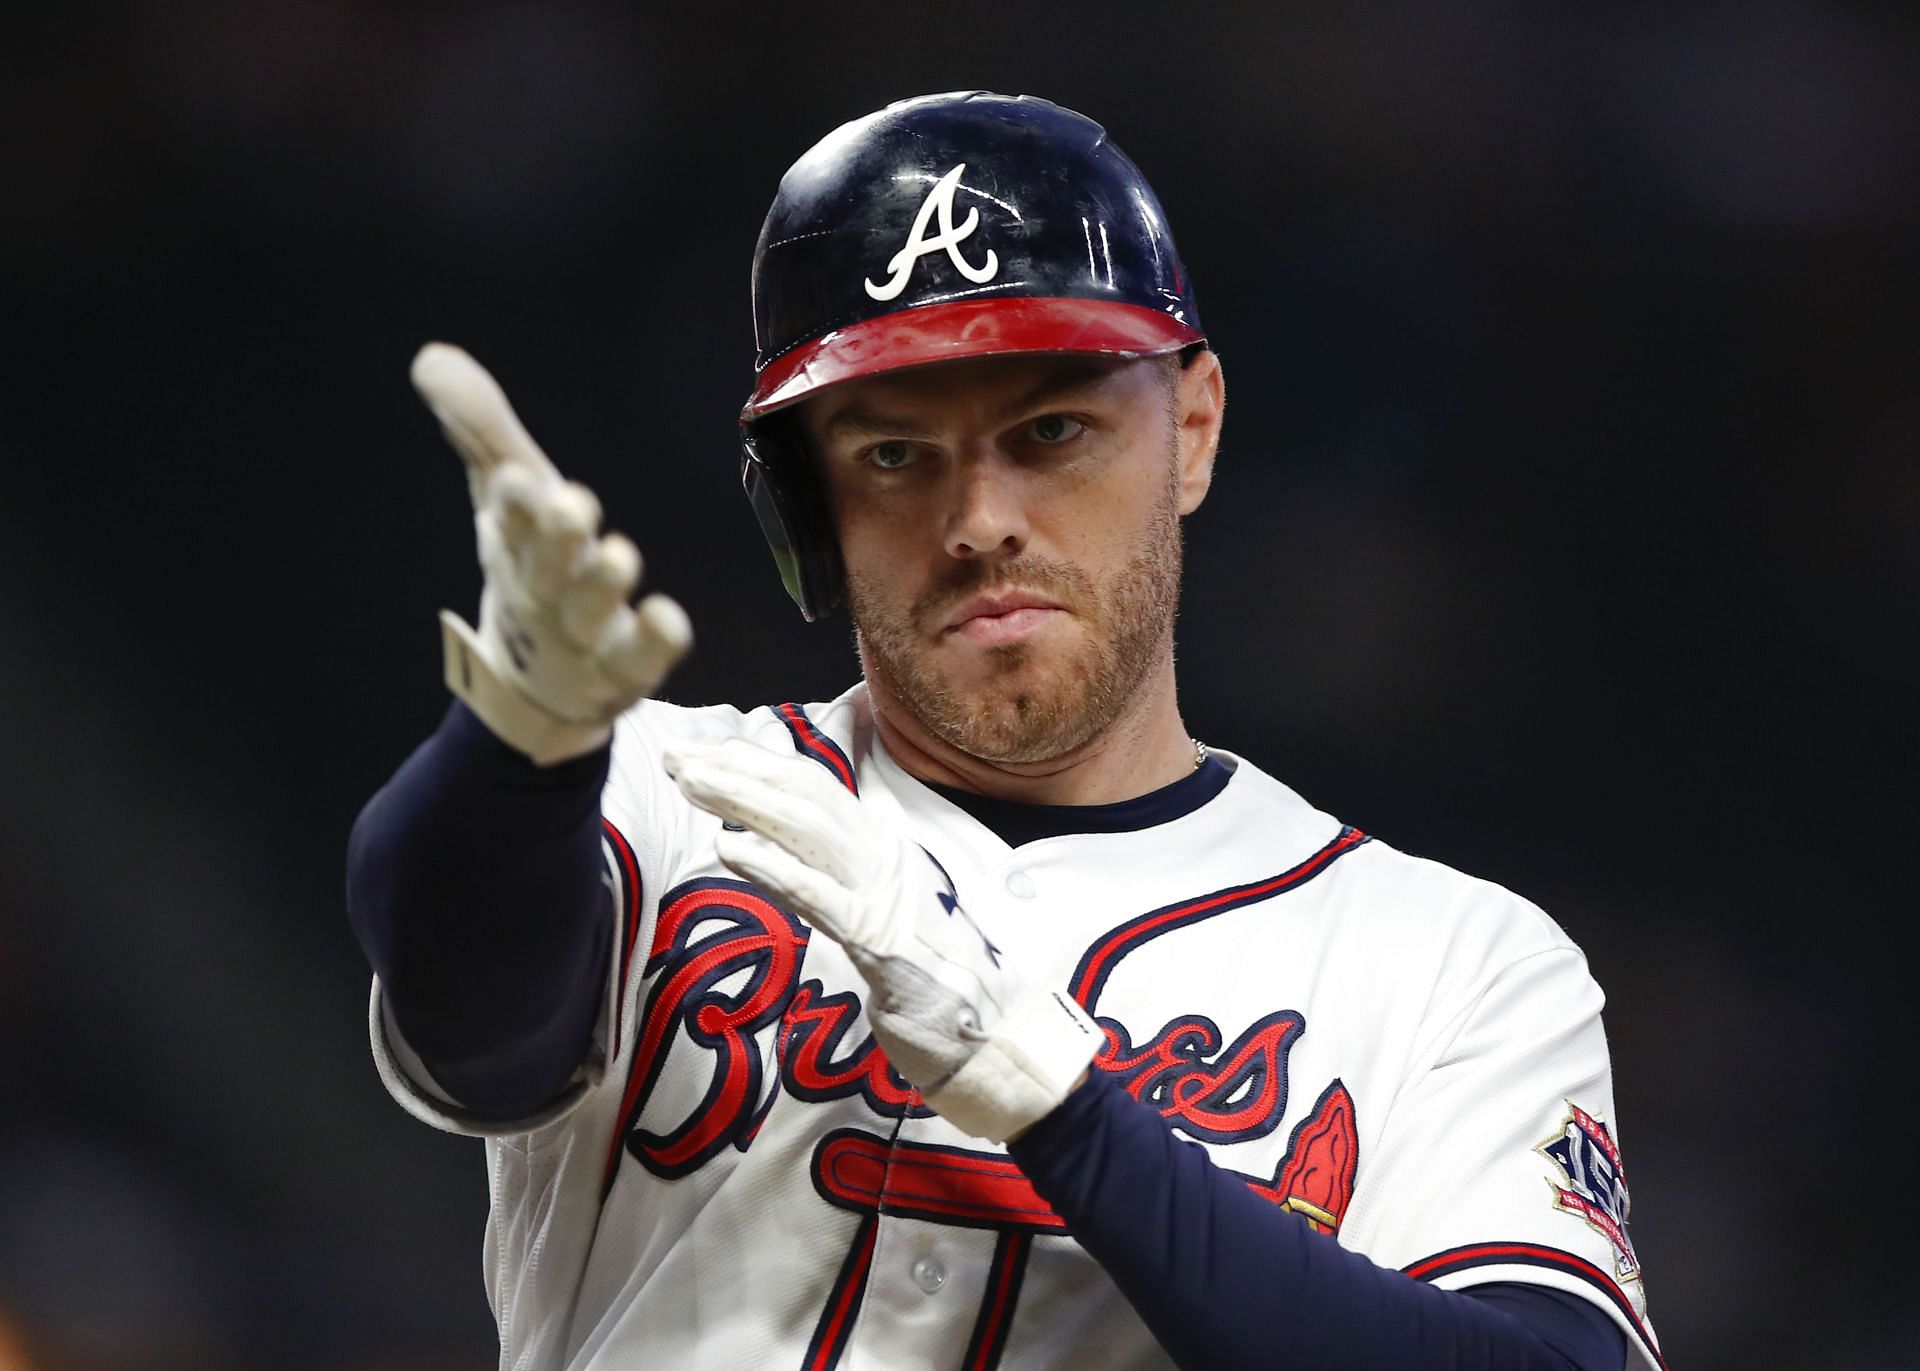 When Freddie Freeman was resolute on signing off his major league career  with Atlanta Braves